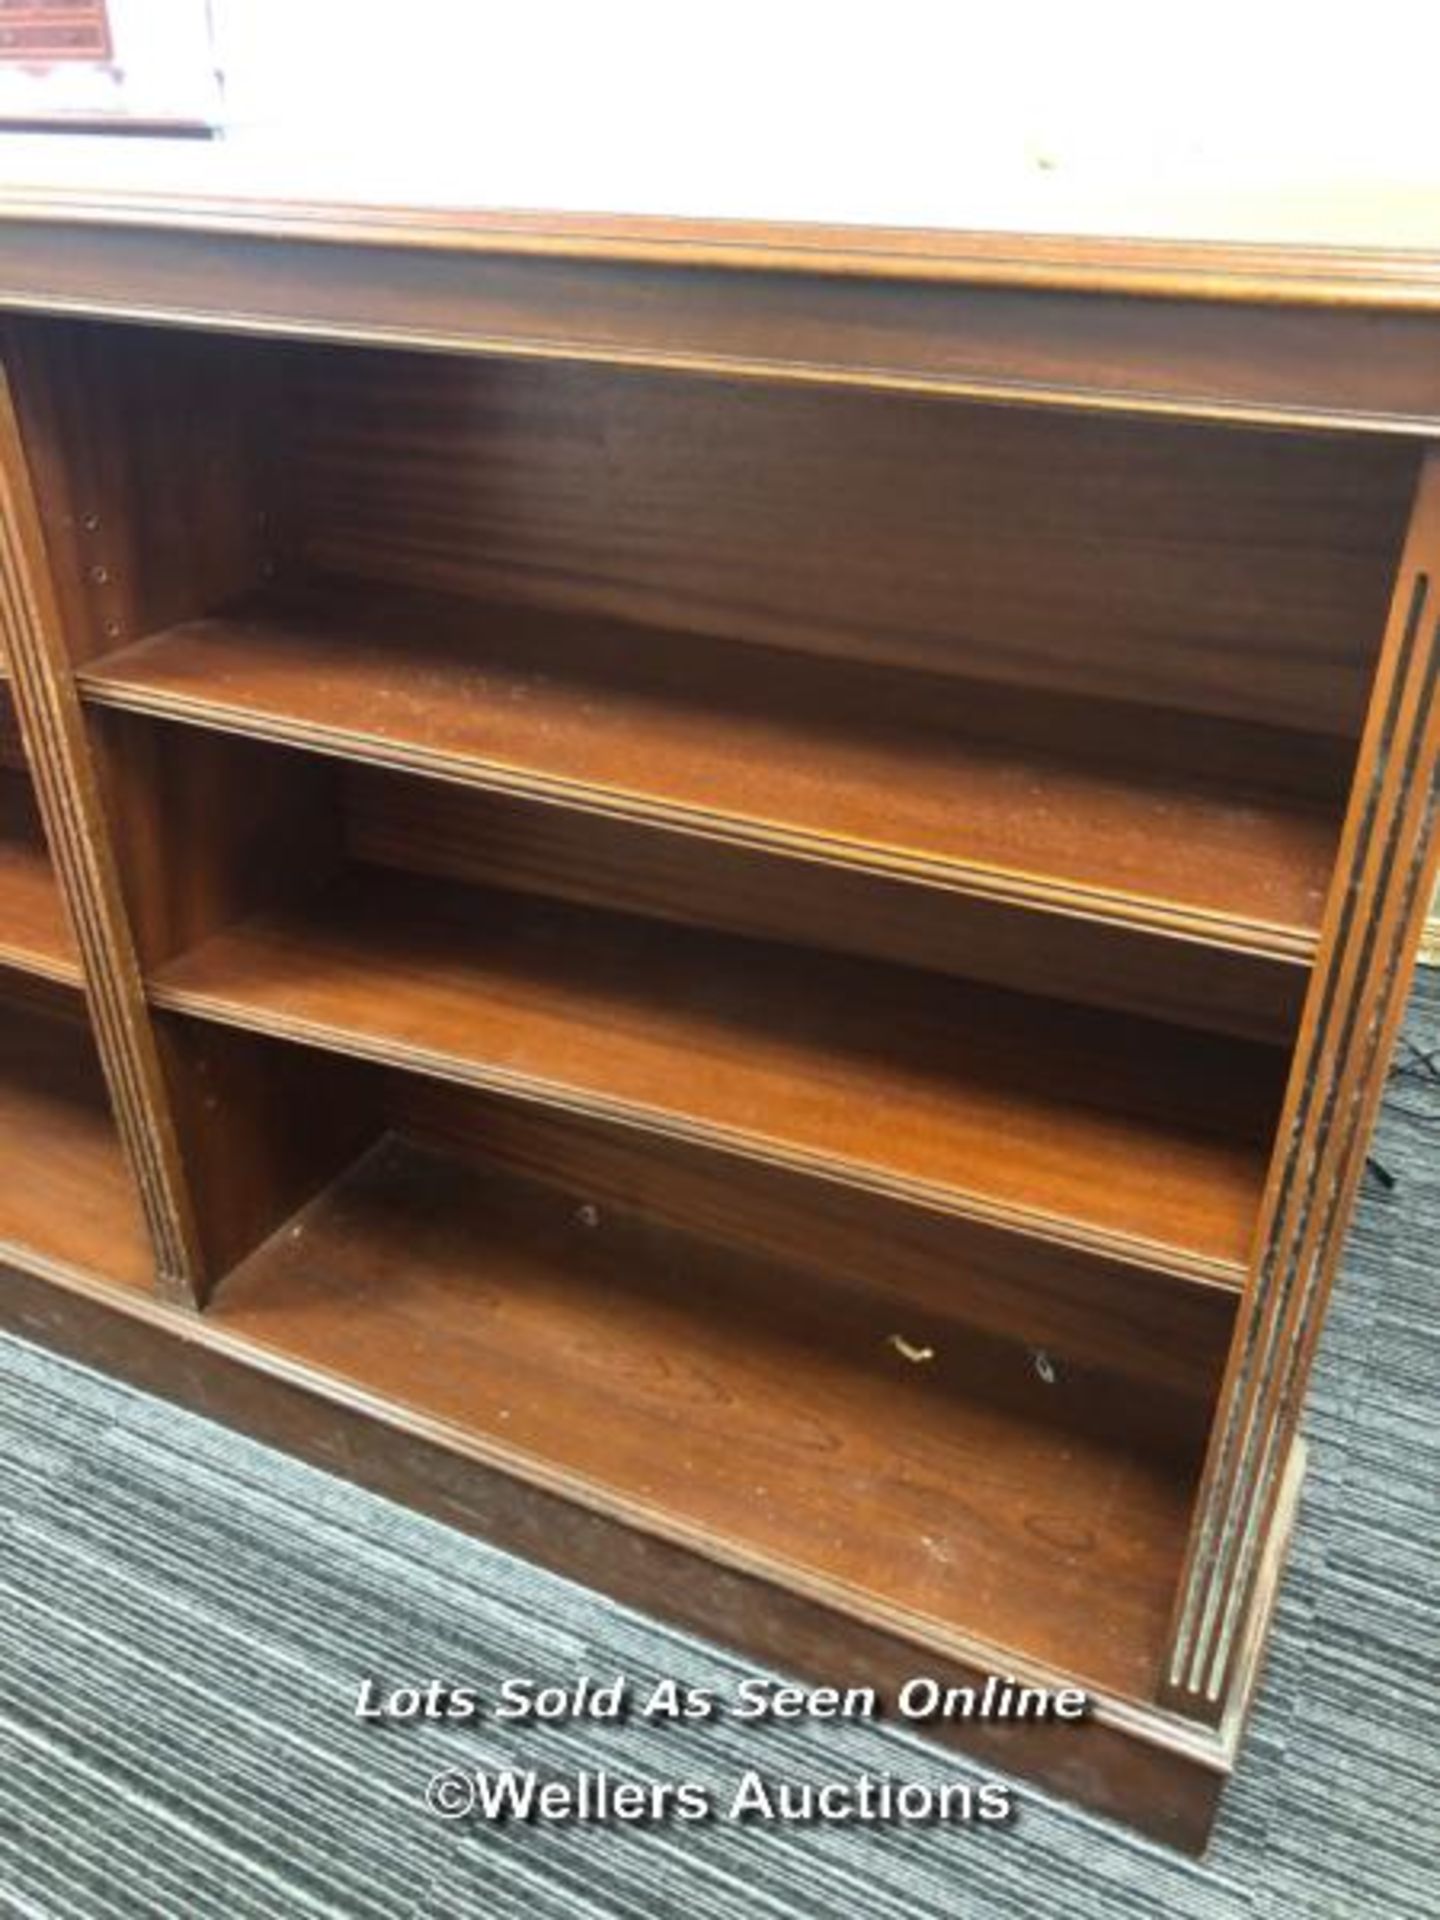 MID-RISE BOOKCASE WITH SIX SHELVES / COLLECTION LOCATION: GODALMING (GU6), FULL ADDRESS AND CONTACT - Image 4 of 4